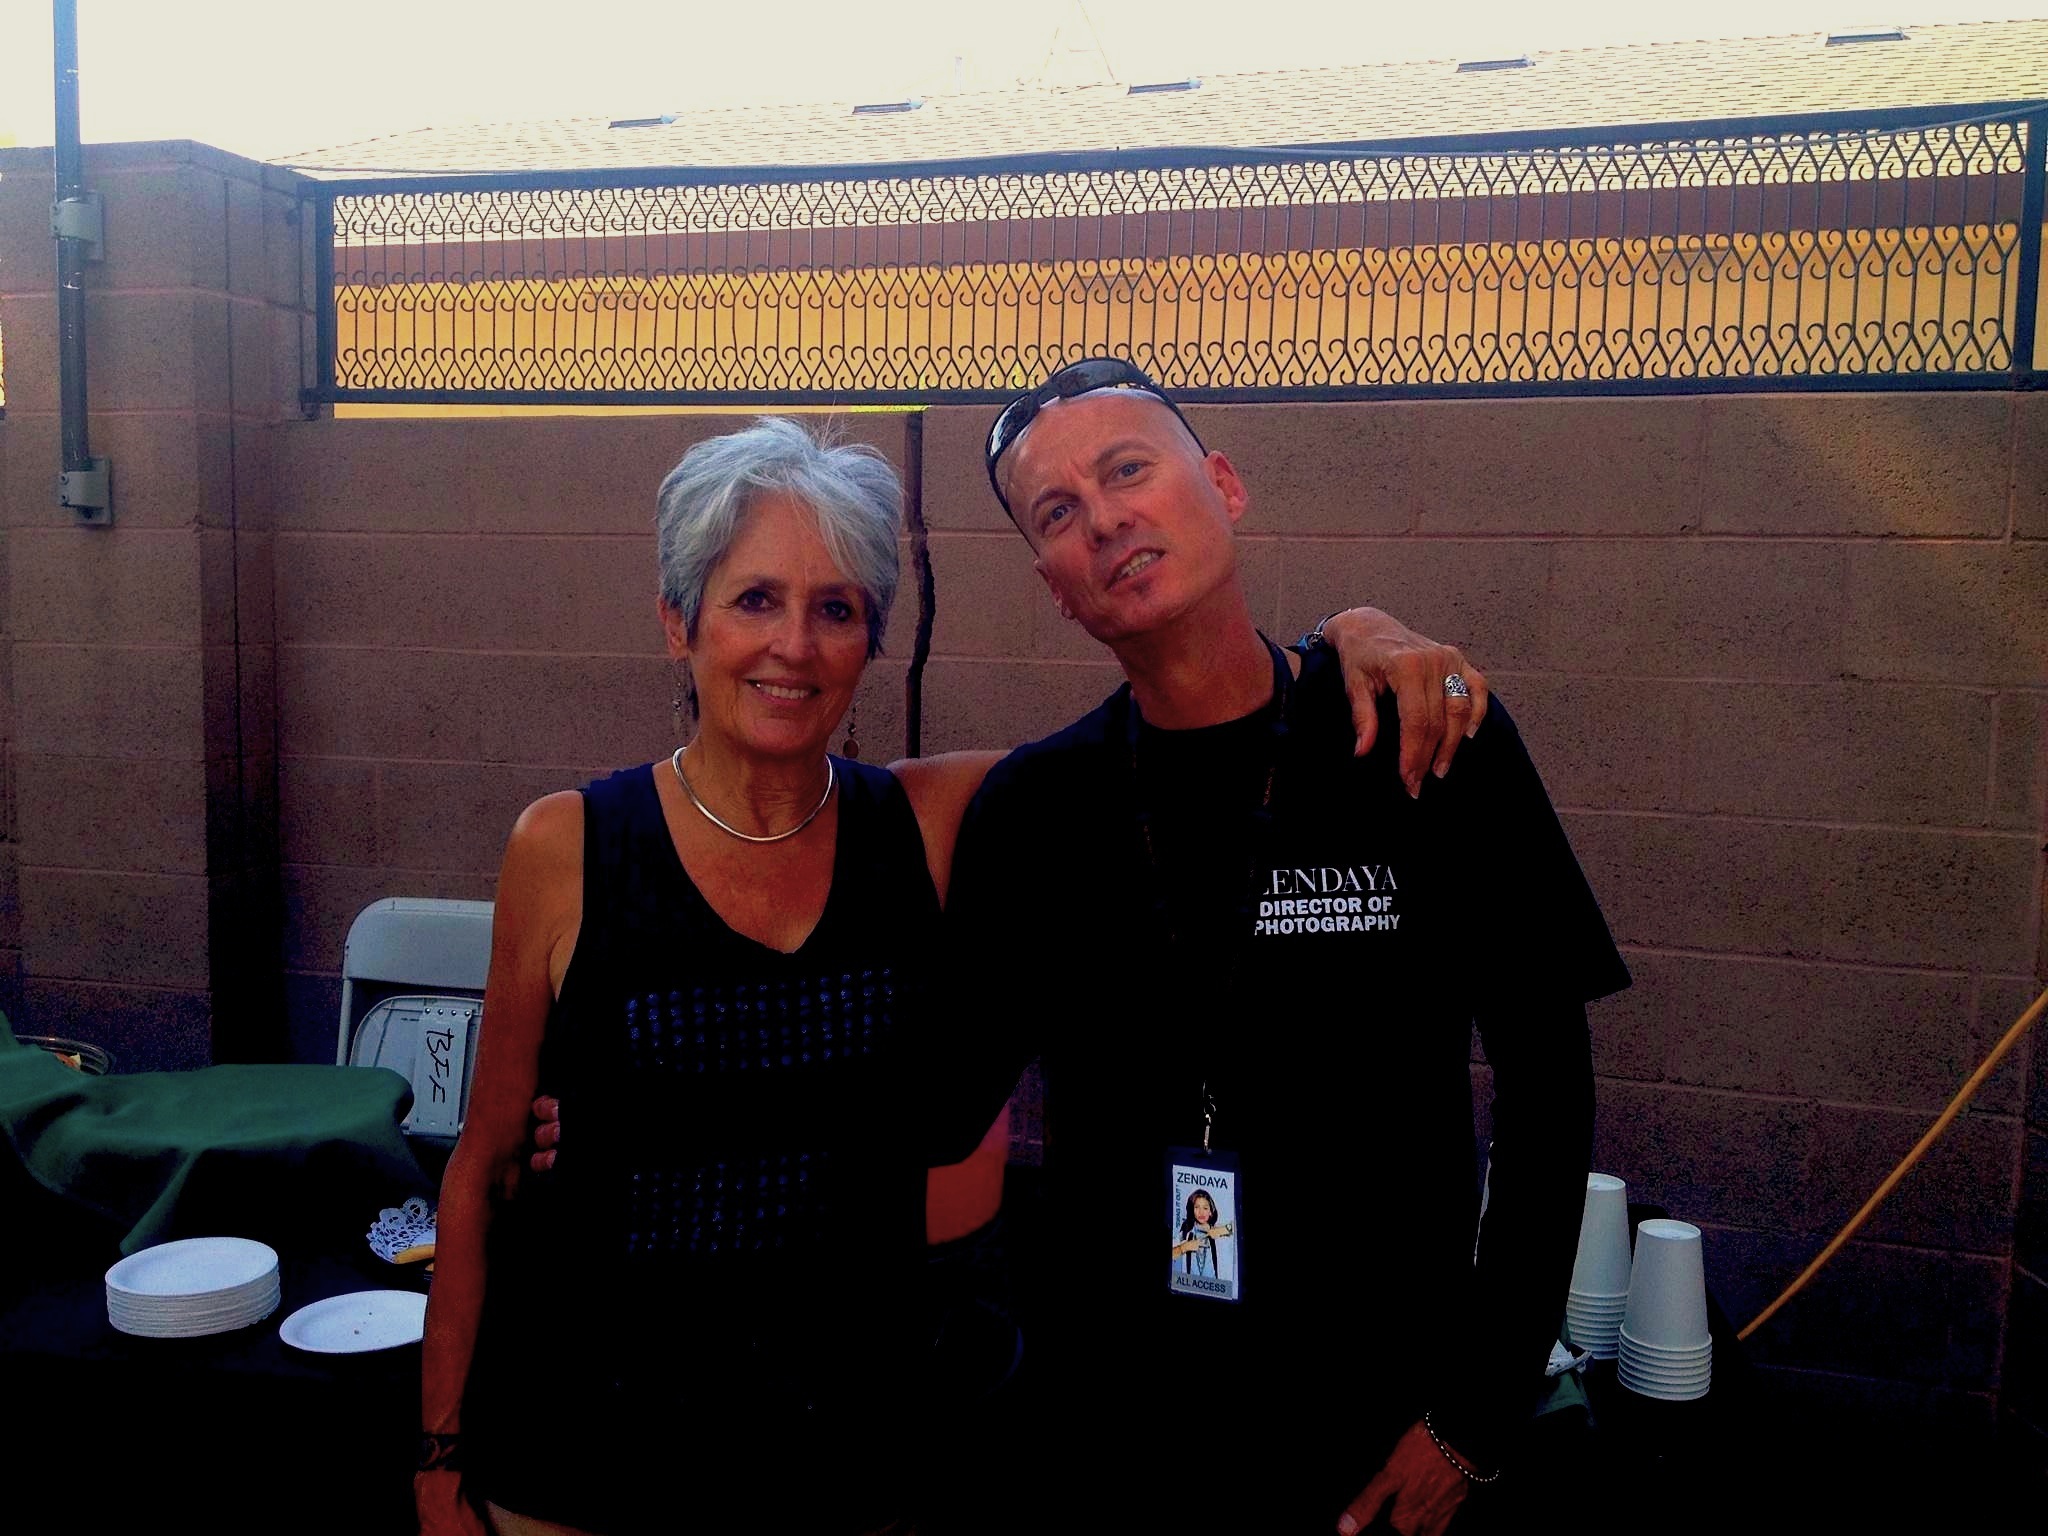 The Great Joan Baez.... and I... at, yes, a Zendaya Concert